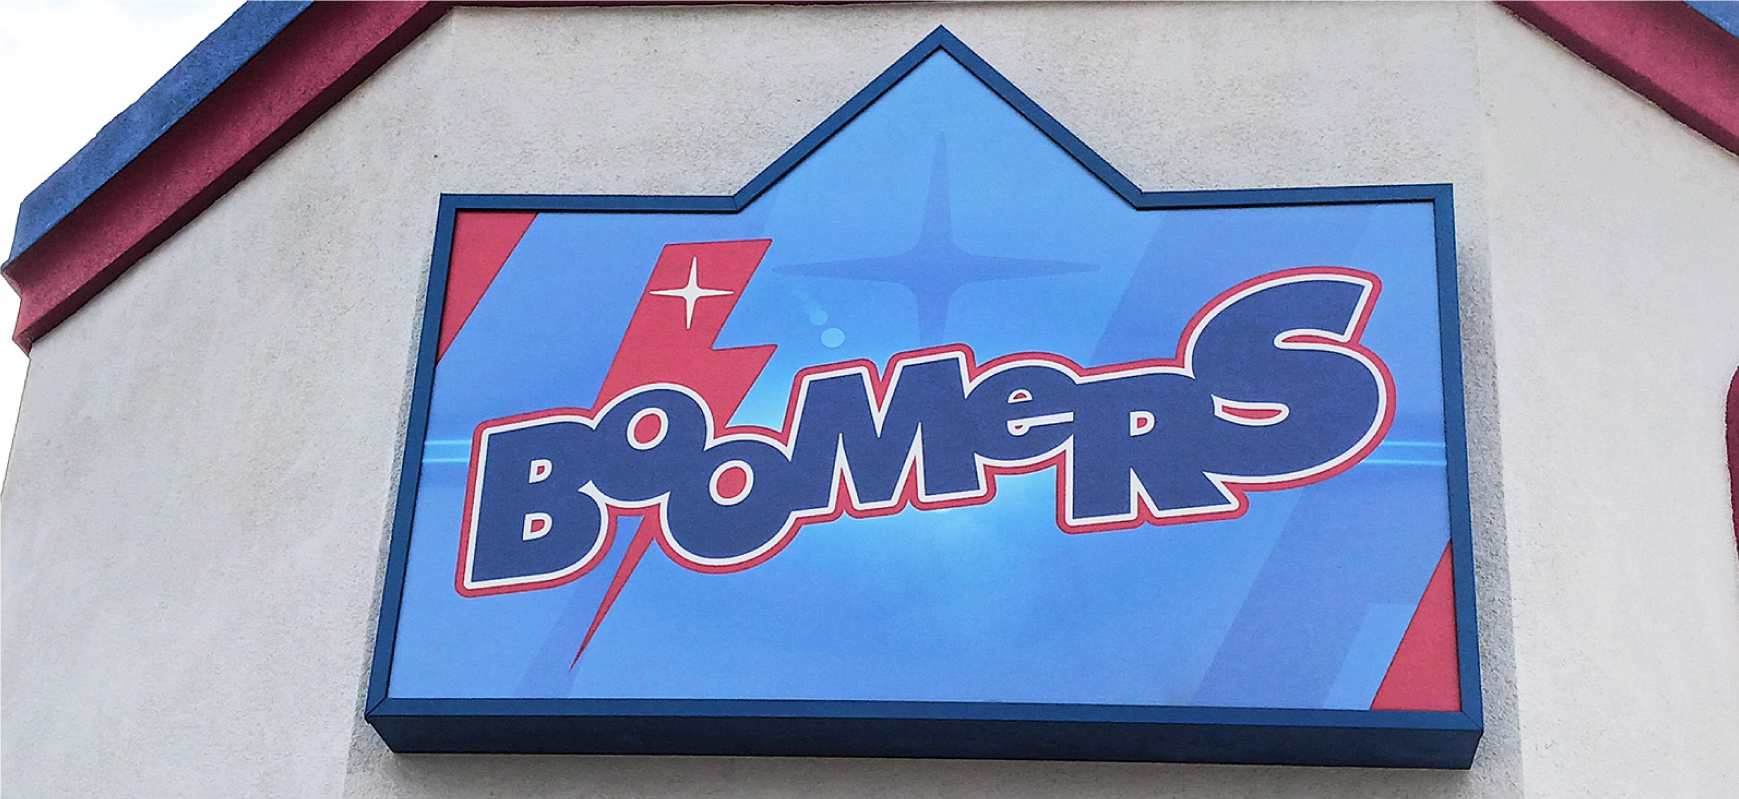 Boomers logo replacement of the blue outdoor display made of lexan and backlit vinyl